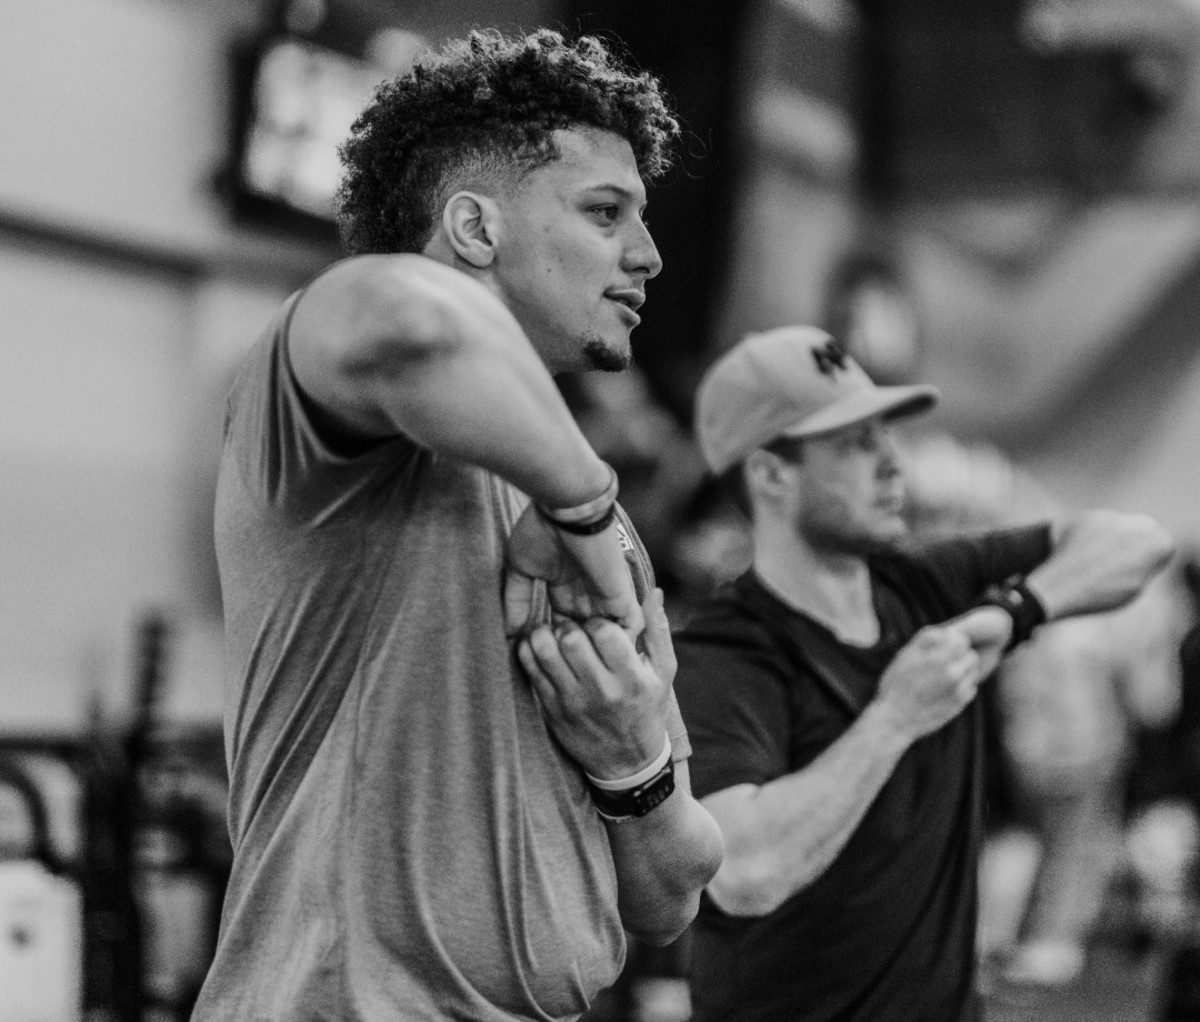 Patrick Mahomes stretching with Bobby Stroupe